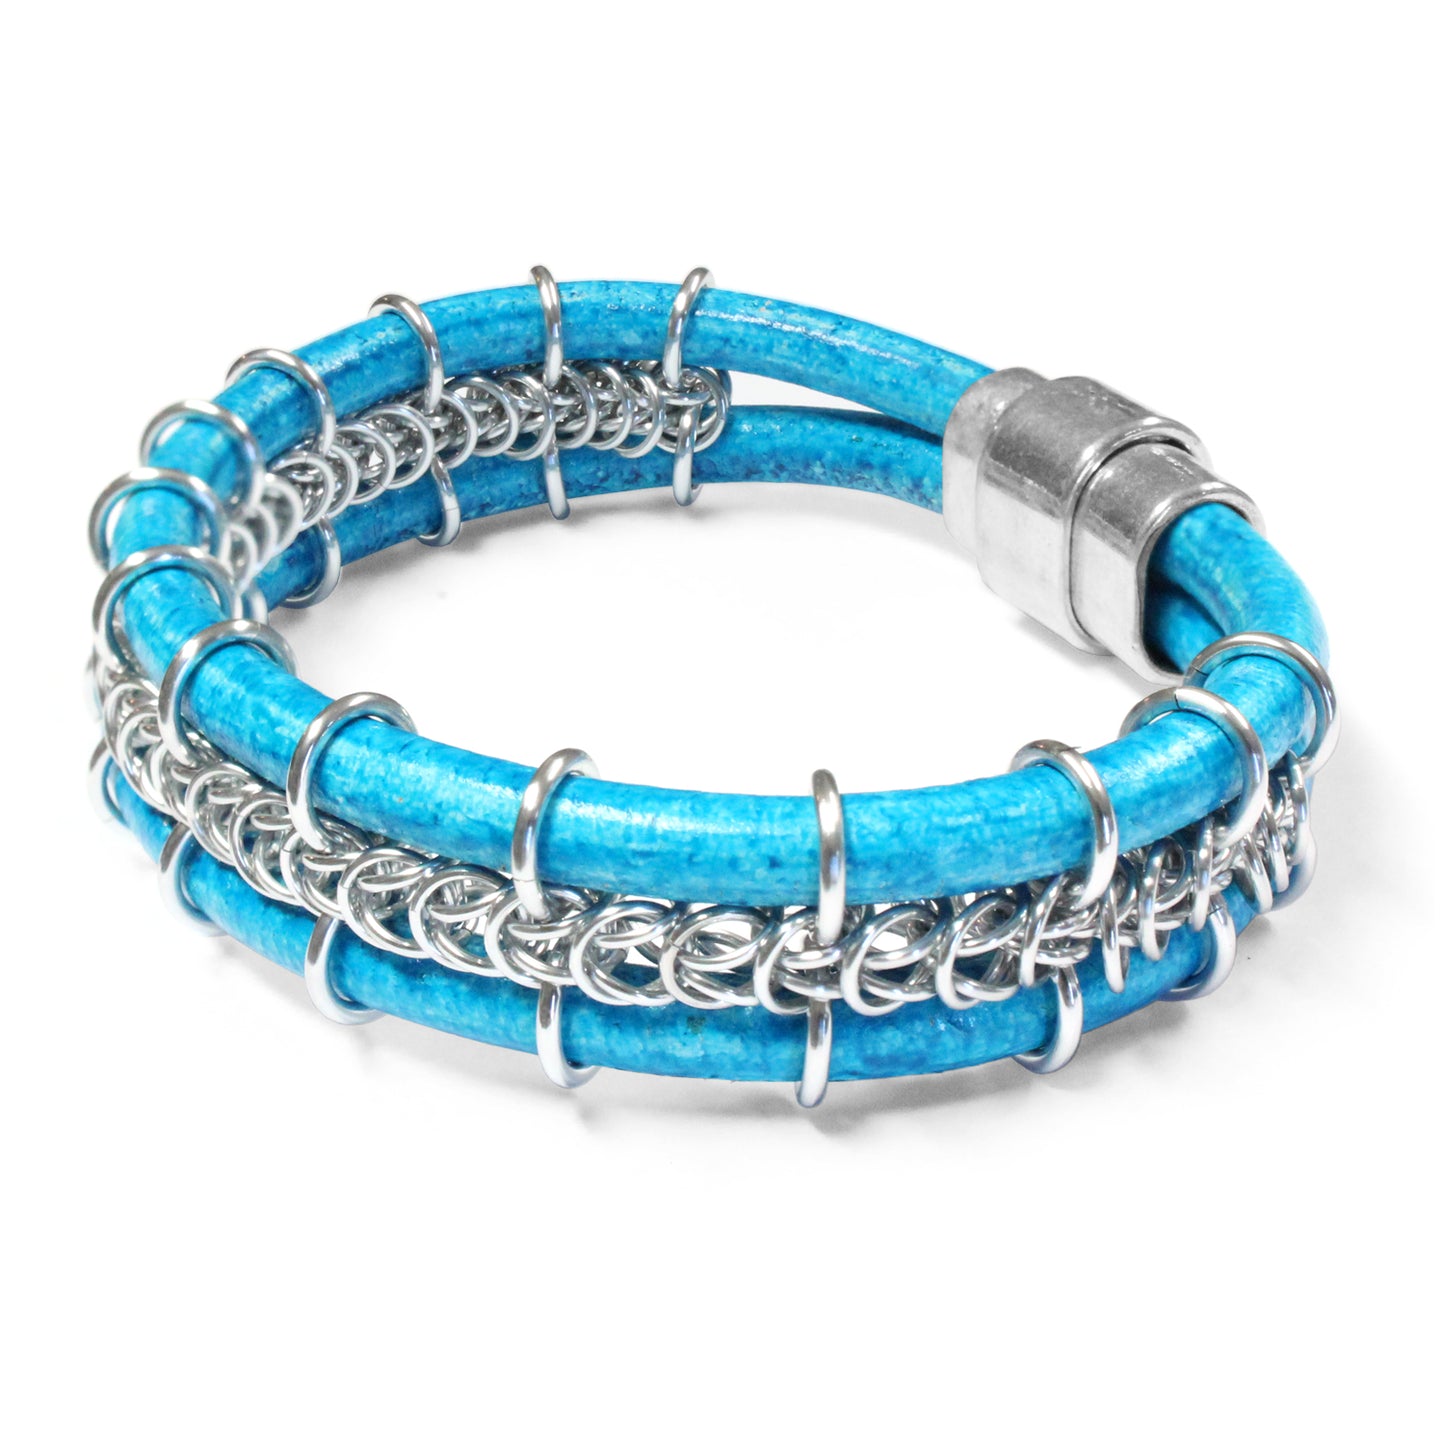 Cord-ially Yours Bracelet / 6.5 to 7 Inch wrist size / bright silver chainmail / distressed turquoise blue leather cord / magnetic clasp